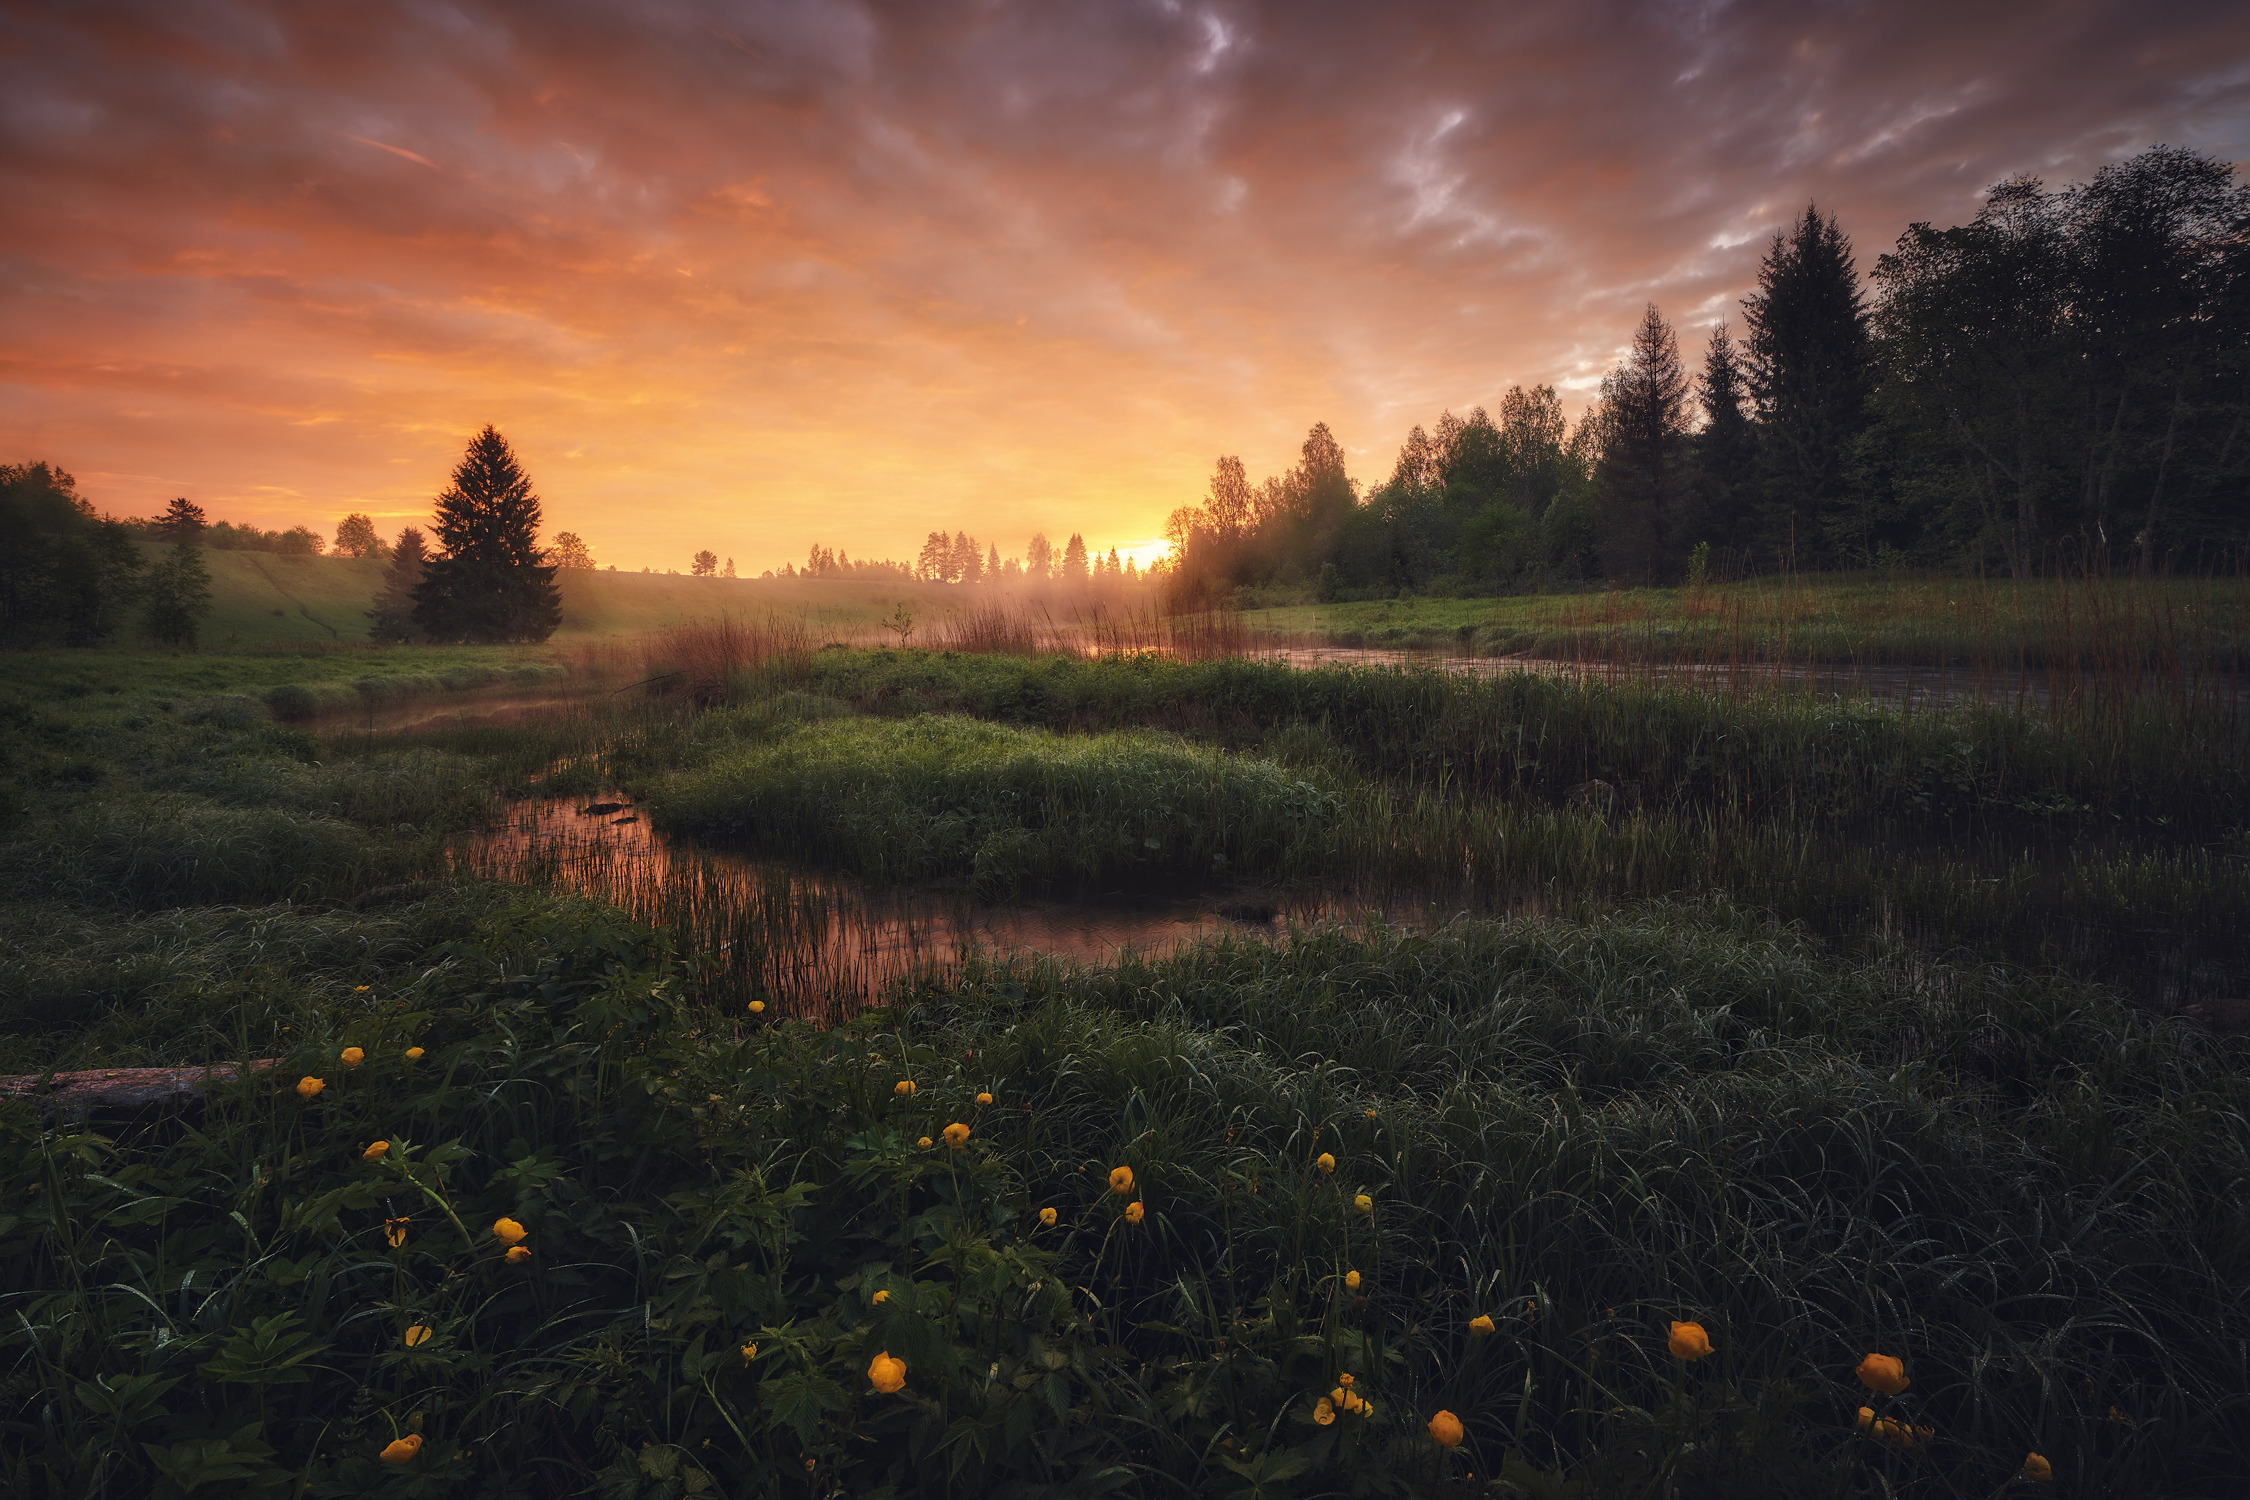 General 2250x1500 Anton Kononov field landscape sunset clouds flowers water trees outdoors photography nature low light